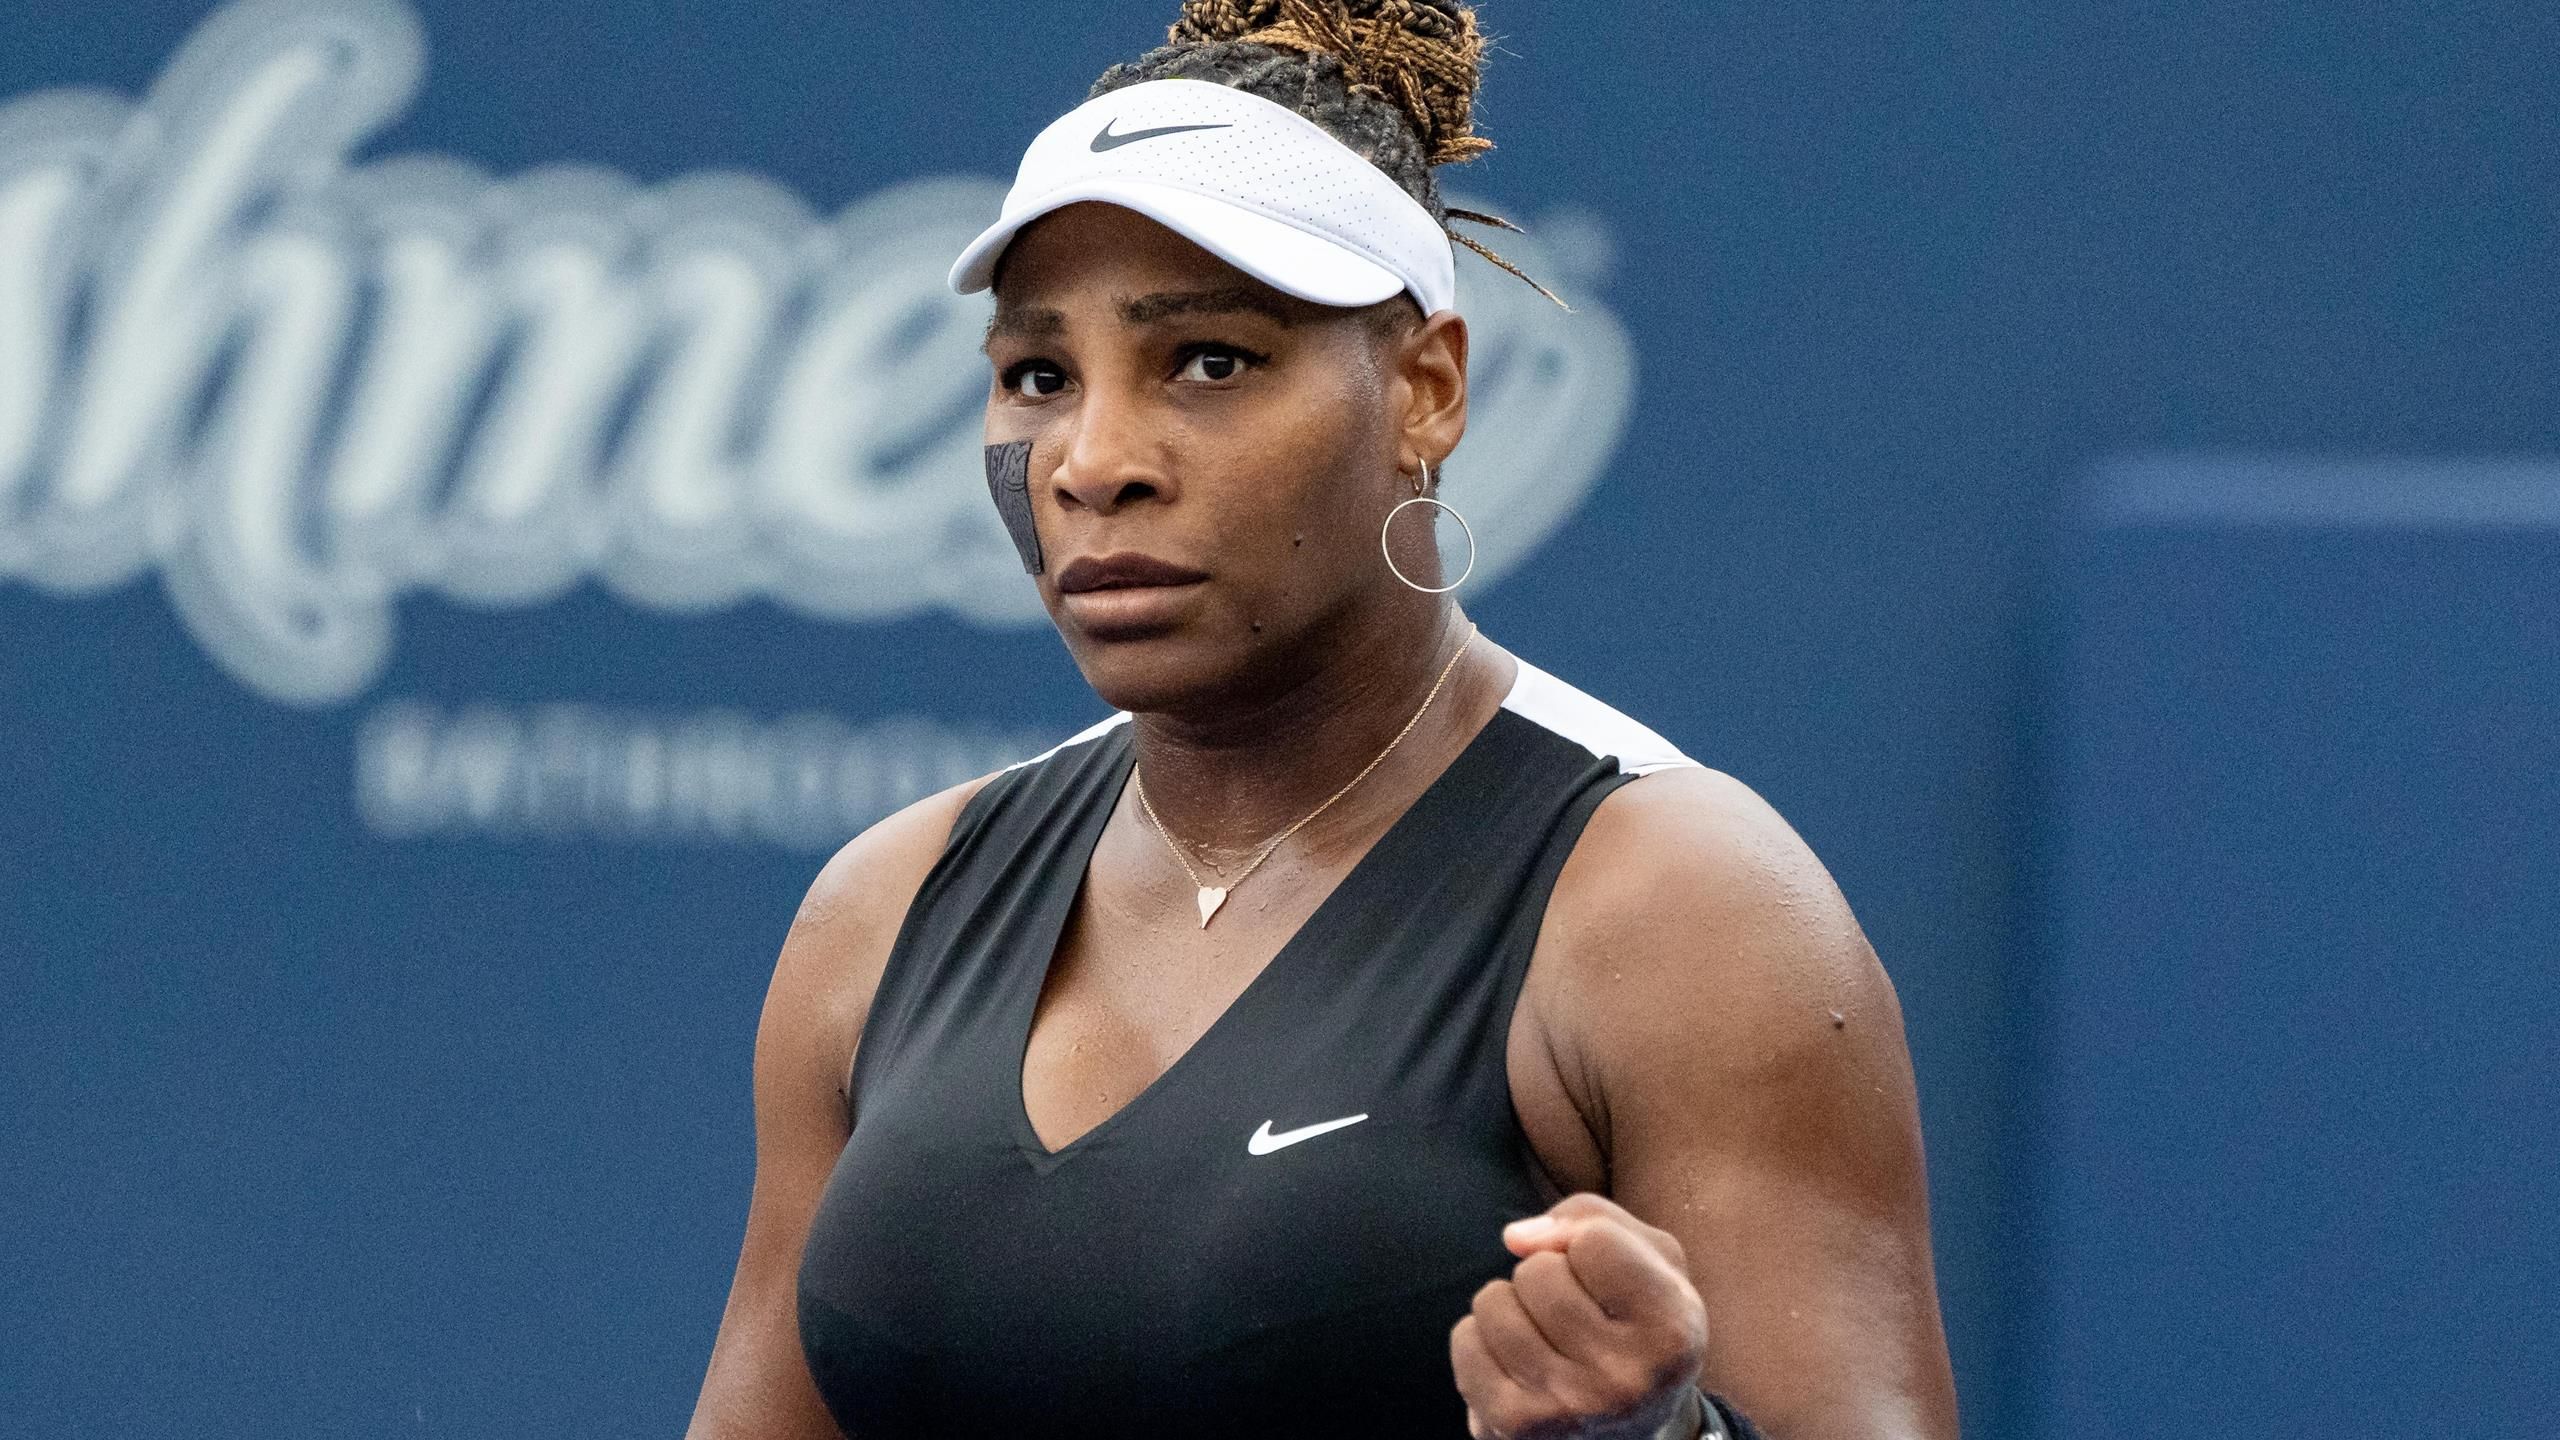 The countdown has begun - Serena Williams confirms retirement from tennis likely after the 2022 US Open